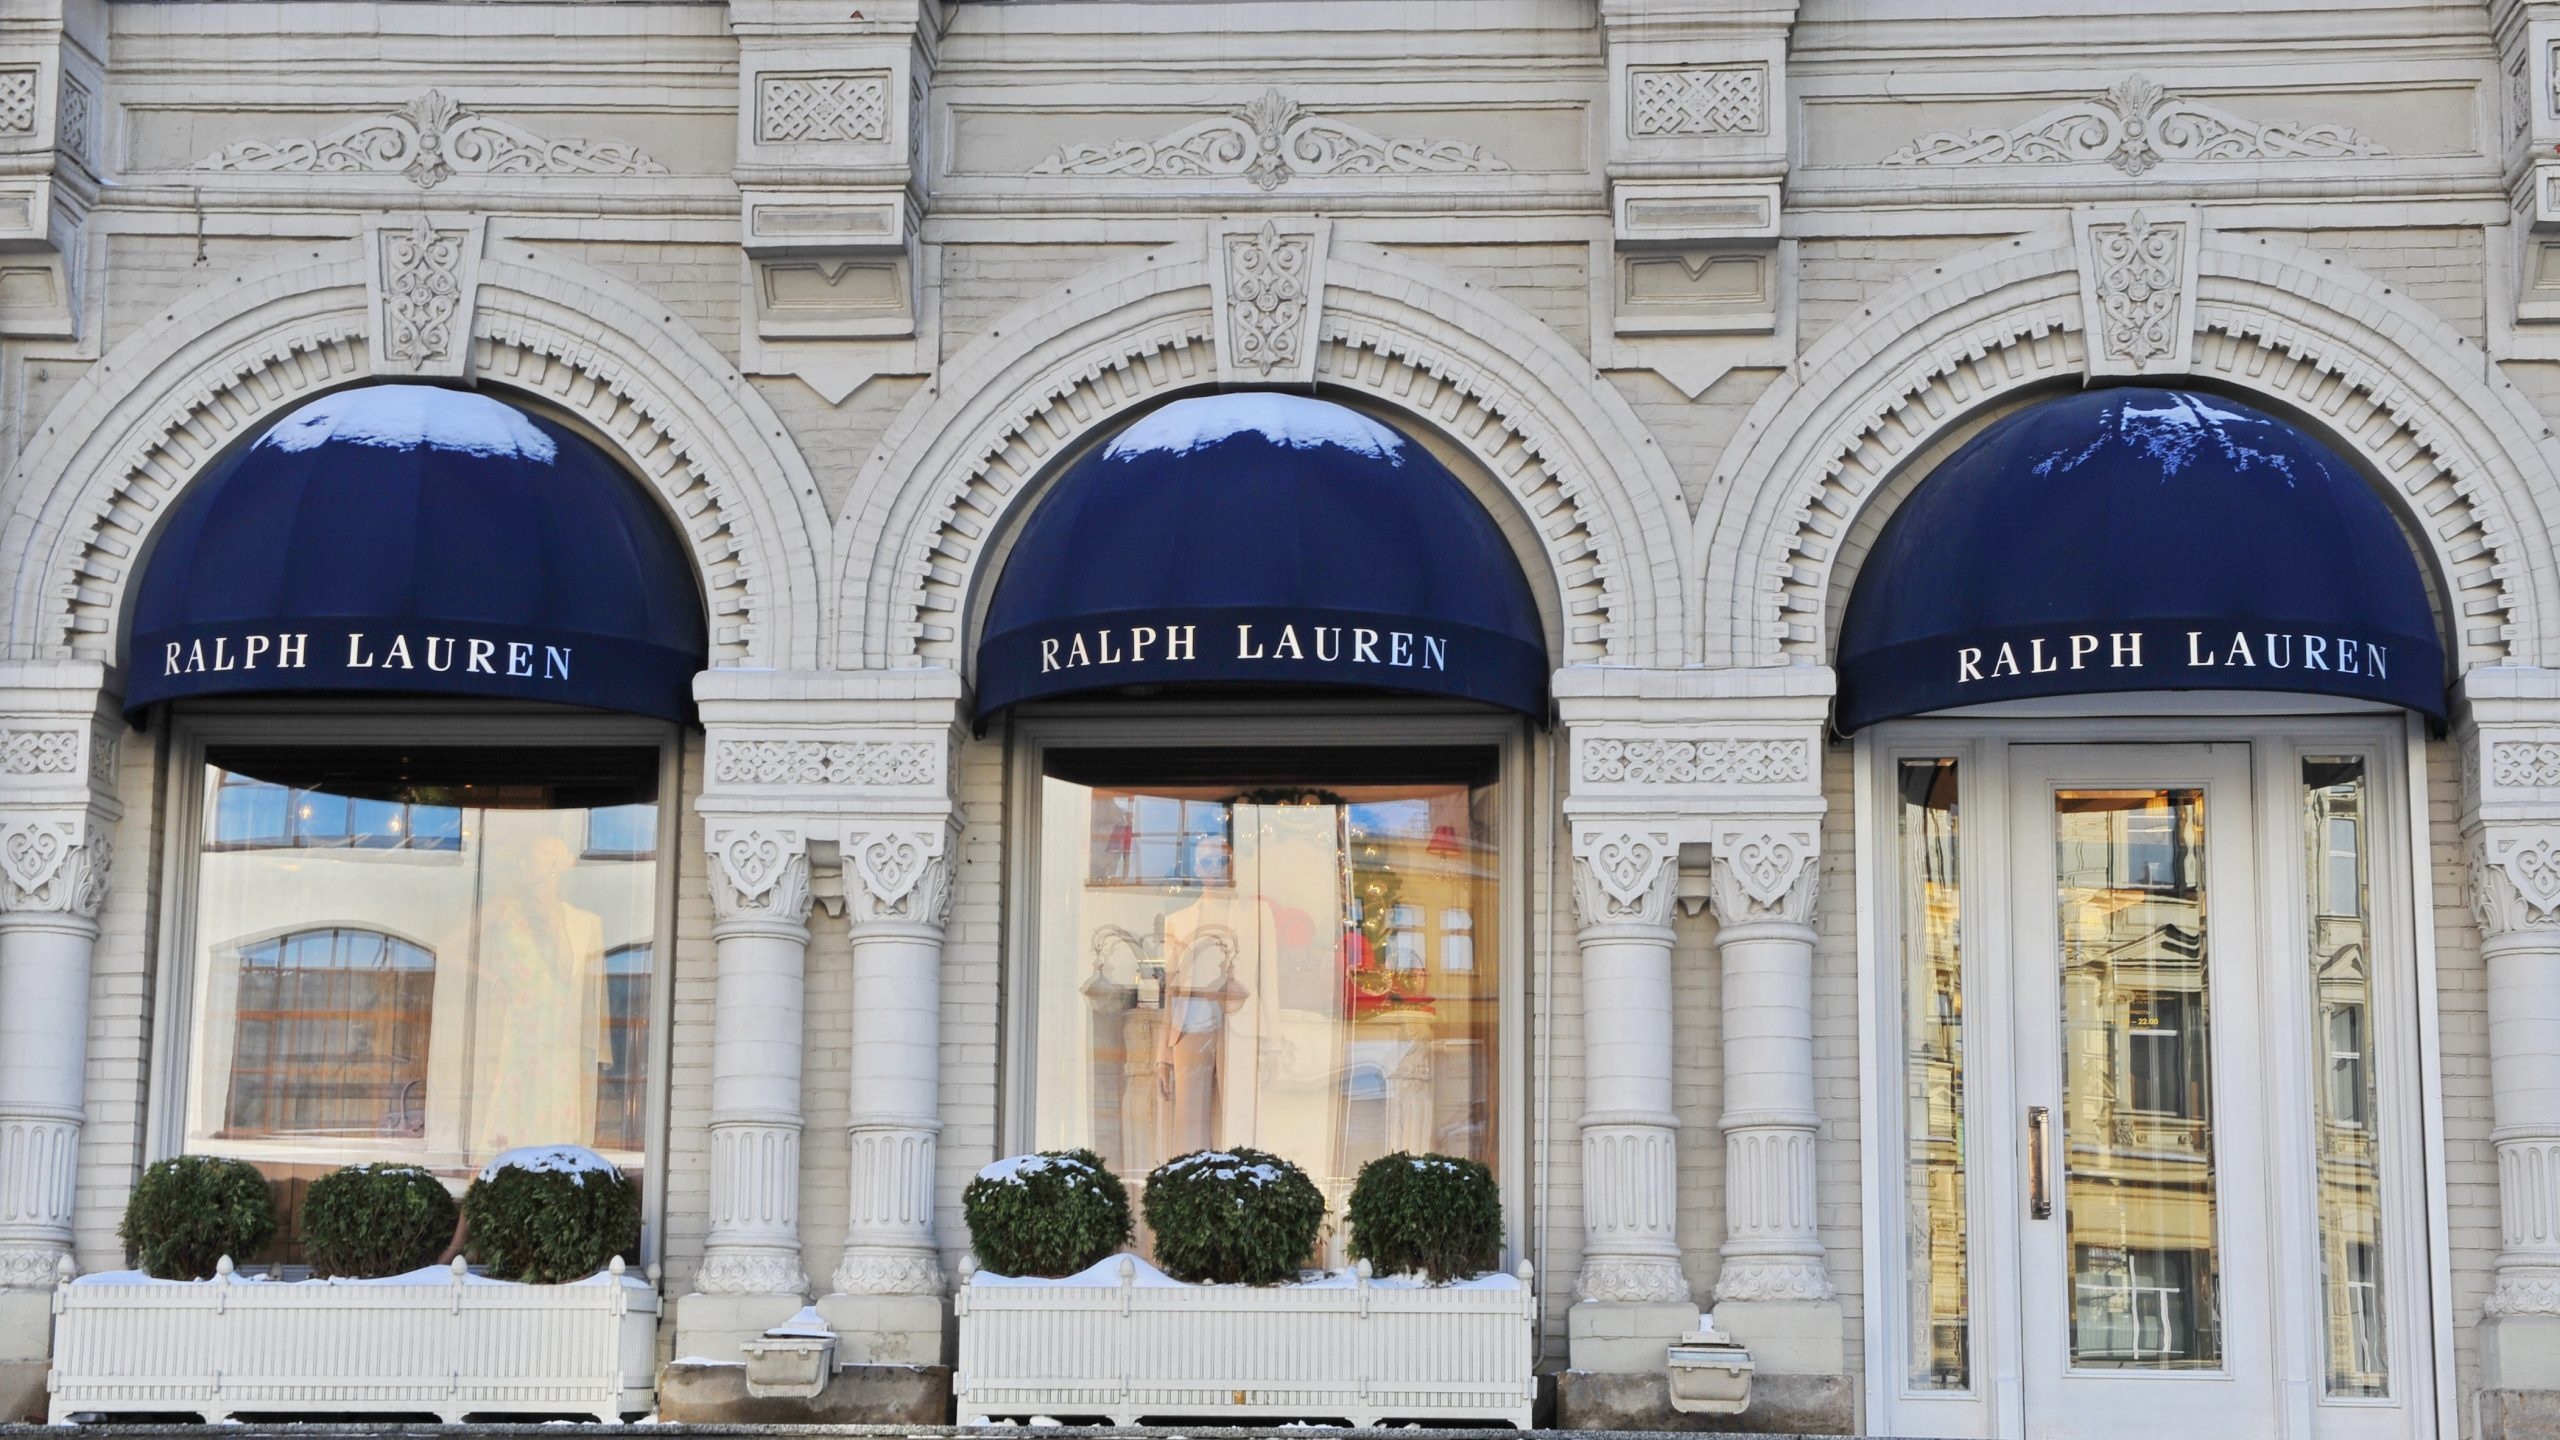 Ralph Lauren opened 94 stores in Asia in 2019 — 39 of which were in China. Photo: Shutterstock